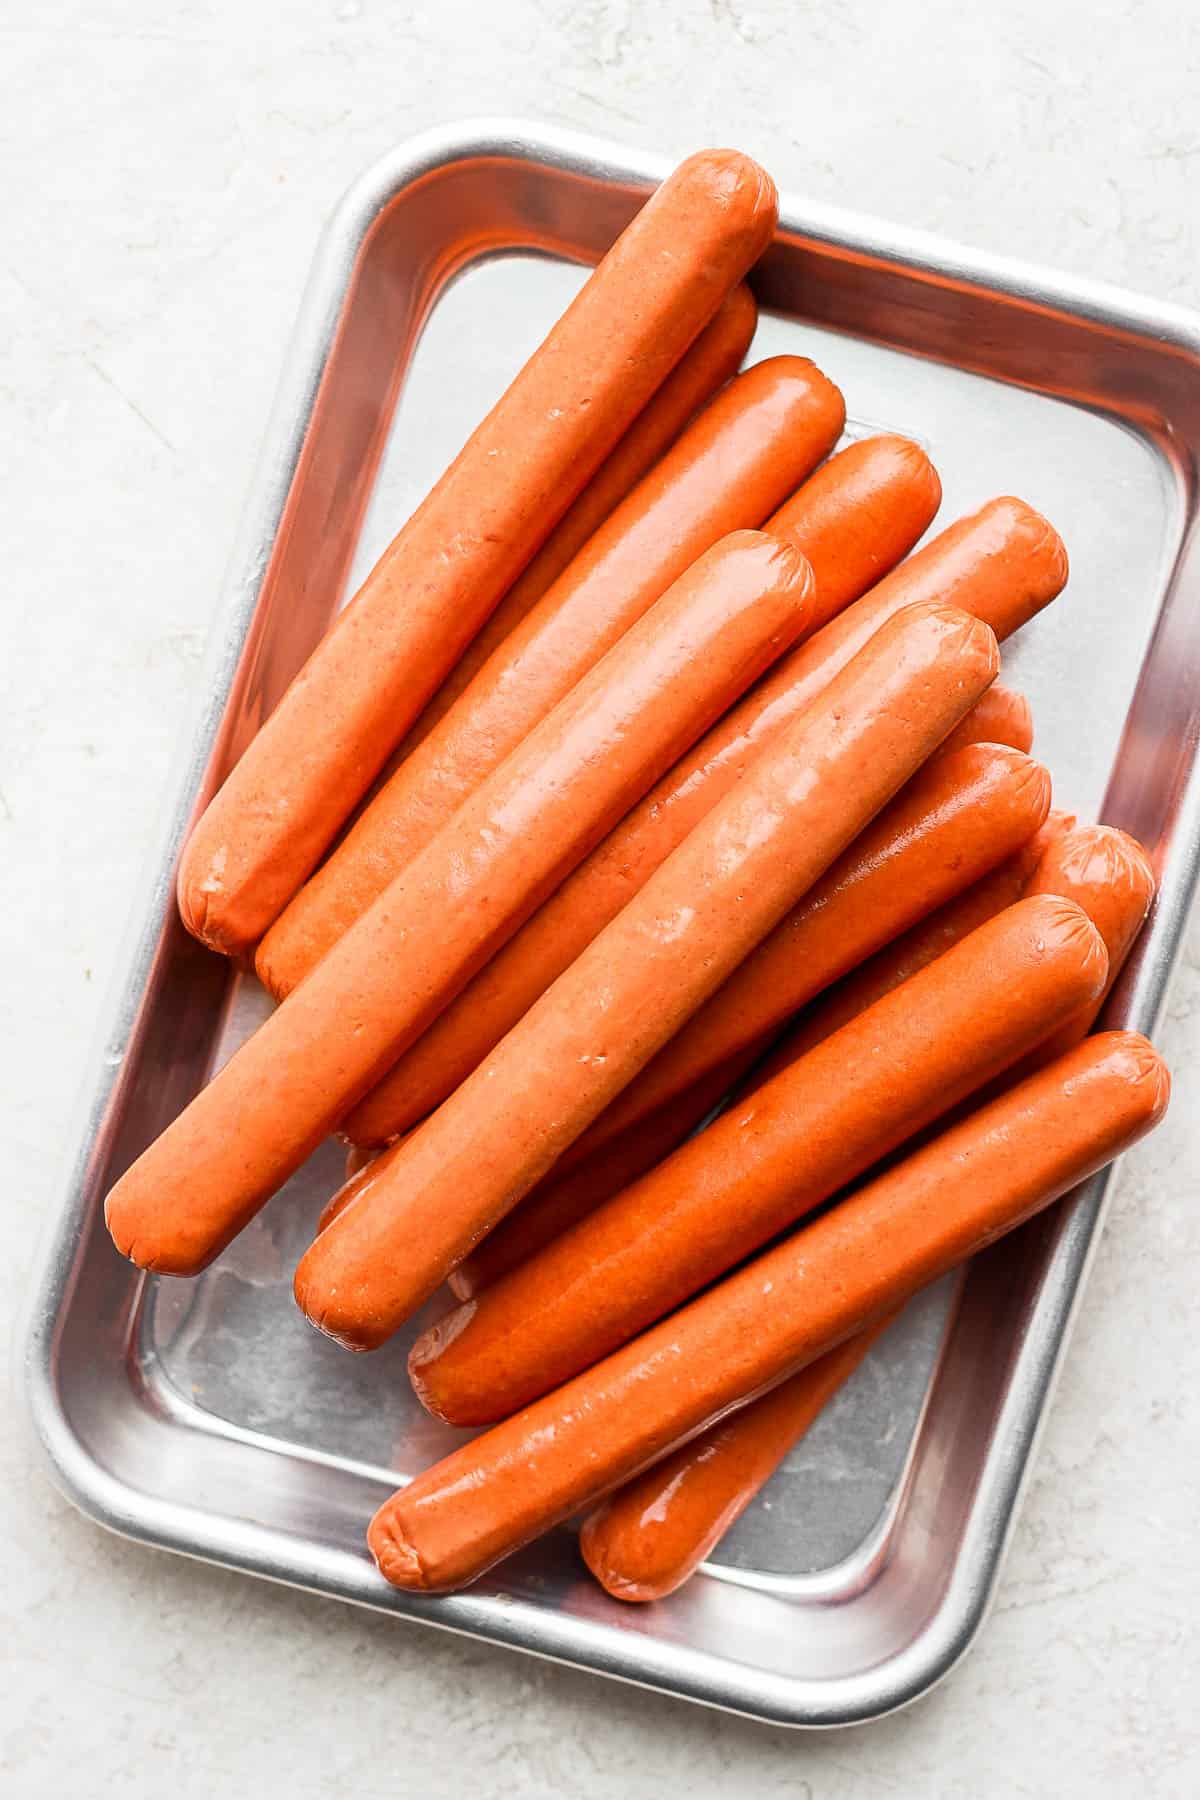 Uncooked hot dogs on a small metal platter.